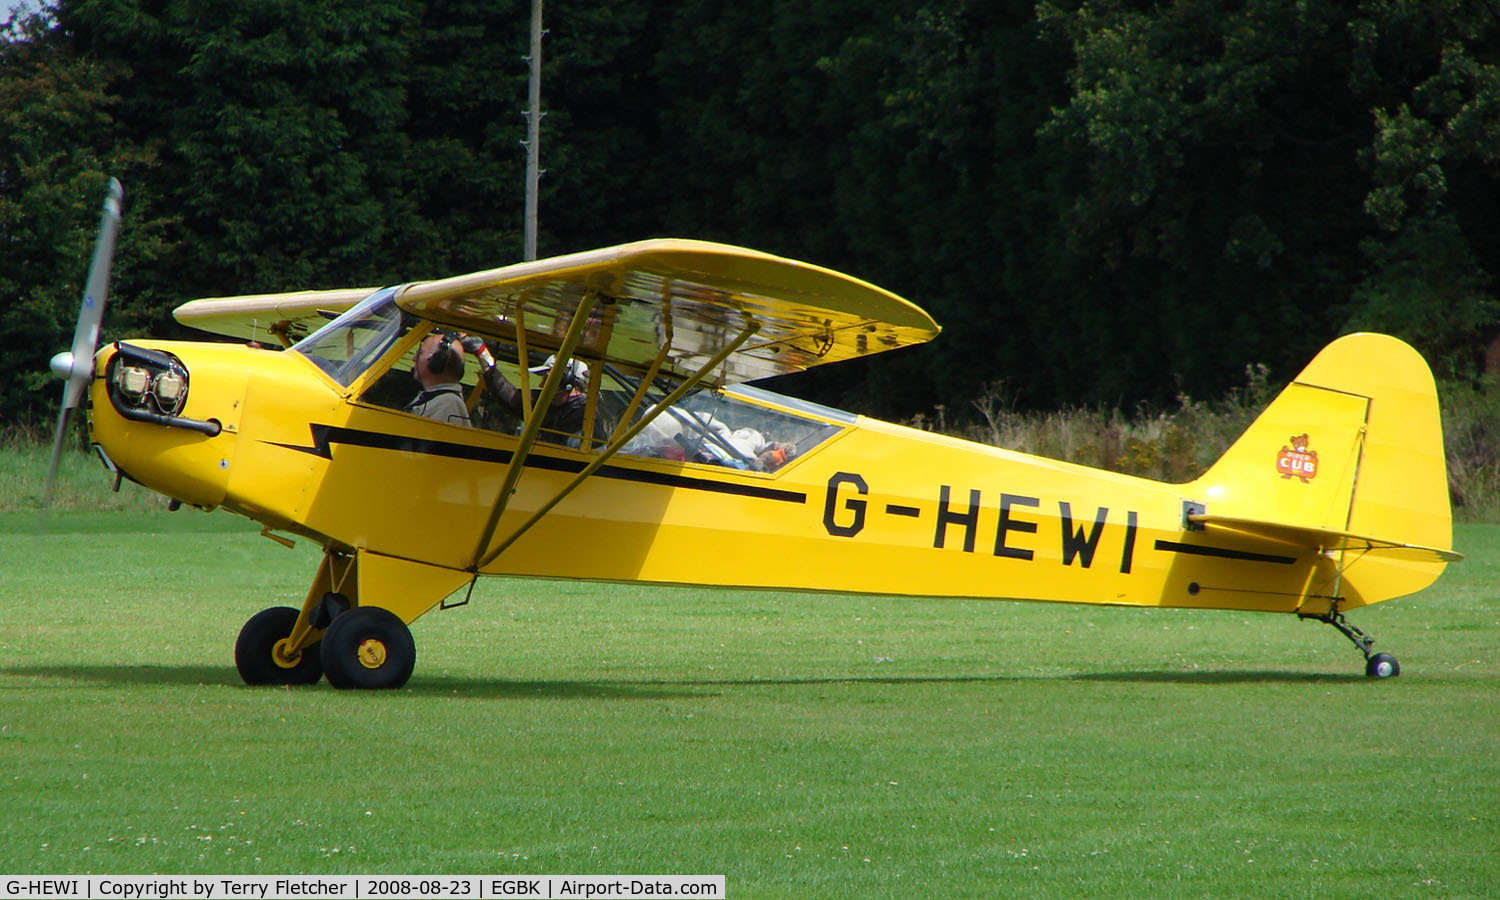 G-HEWI, 1944 Piper L-4J Grasshopper (J3C-65D) C/N 12566, 1944 Piper Cub - Visitor to Sywell on 2008 Ragwing Fly-in day